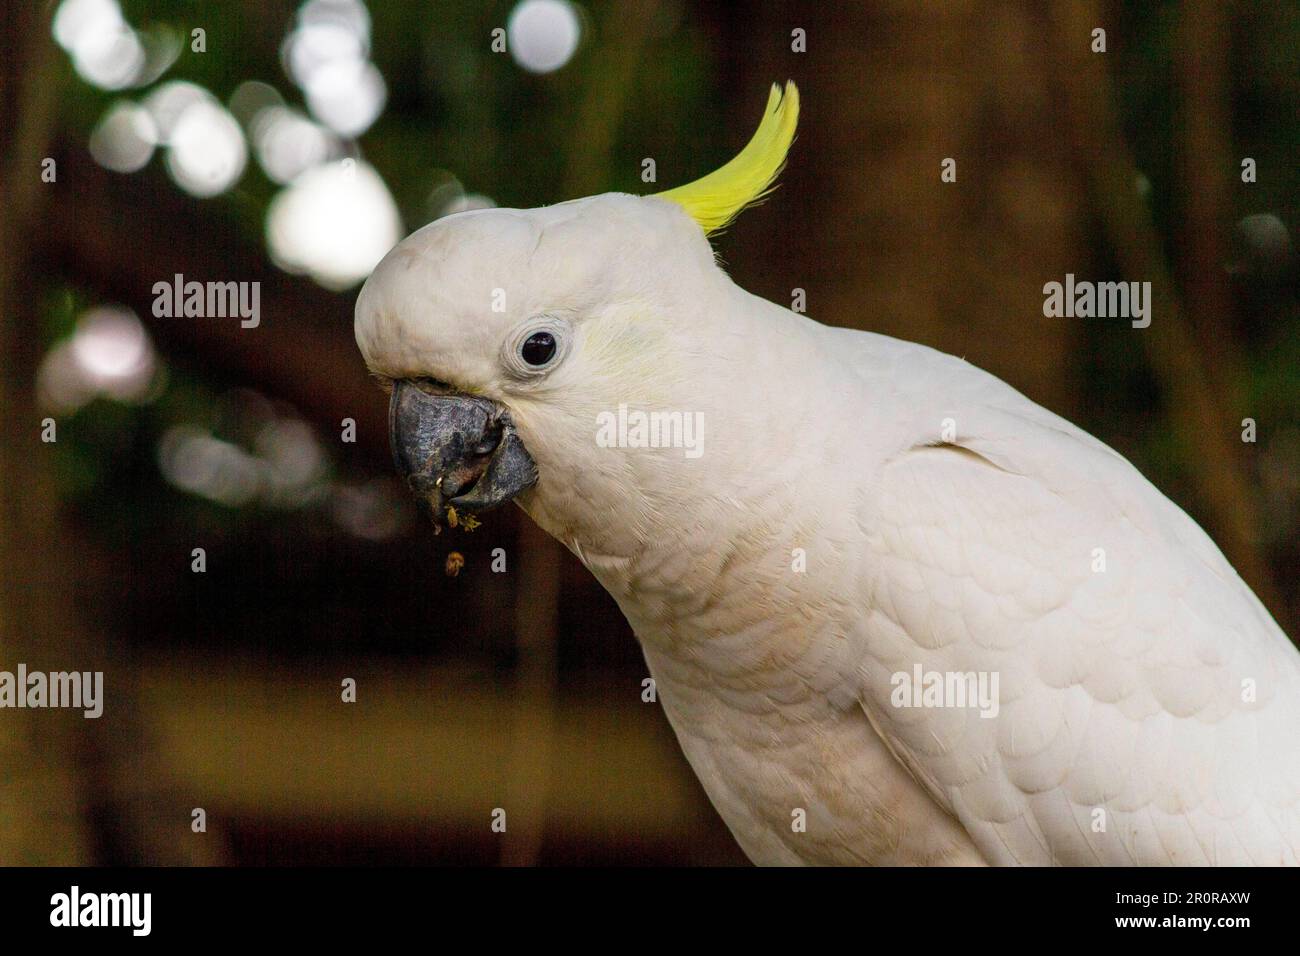 May 8, 2023, Sydney, New South Wales, Australia: Close ''“ up of Sulphur-Crested Cockatoo (Cacatua galerita) in Sydney, New South Wales, Australia. The Sulphur-Crested Cockatoo is a relatively large white cockatoo with a spectacular plumed yellow crest and dark bill. It is found in wooded habitats in Australia, New Guinea, and some of the islands of Indonesia. Sulphur Crested Cockatoos have multiple subspecies like Lesser, Medium, and Greater Sulphur Crested Cockatoo; all belong to the same Genus (Cacatua) and Phylum. Since all subspecies of Sulphur Crested cockatoos look very similar, they ar Stock Photo